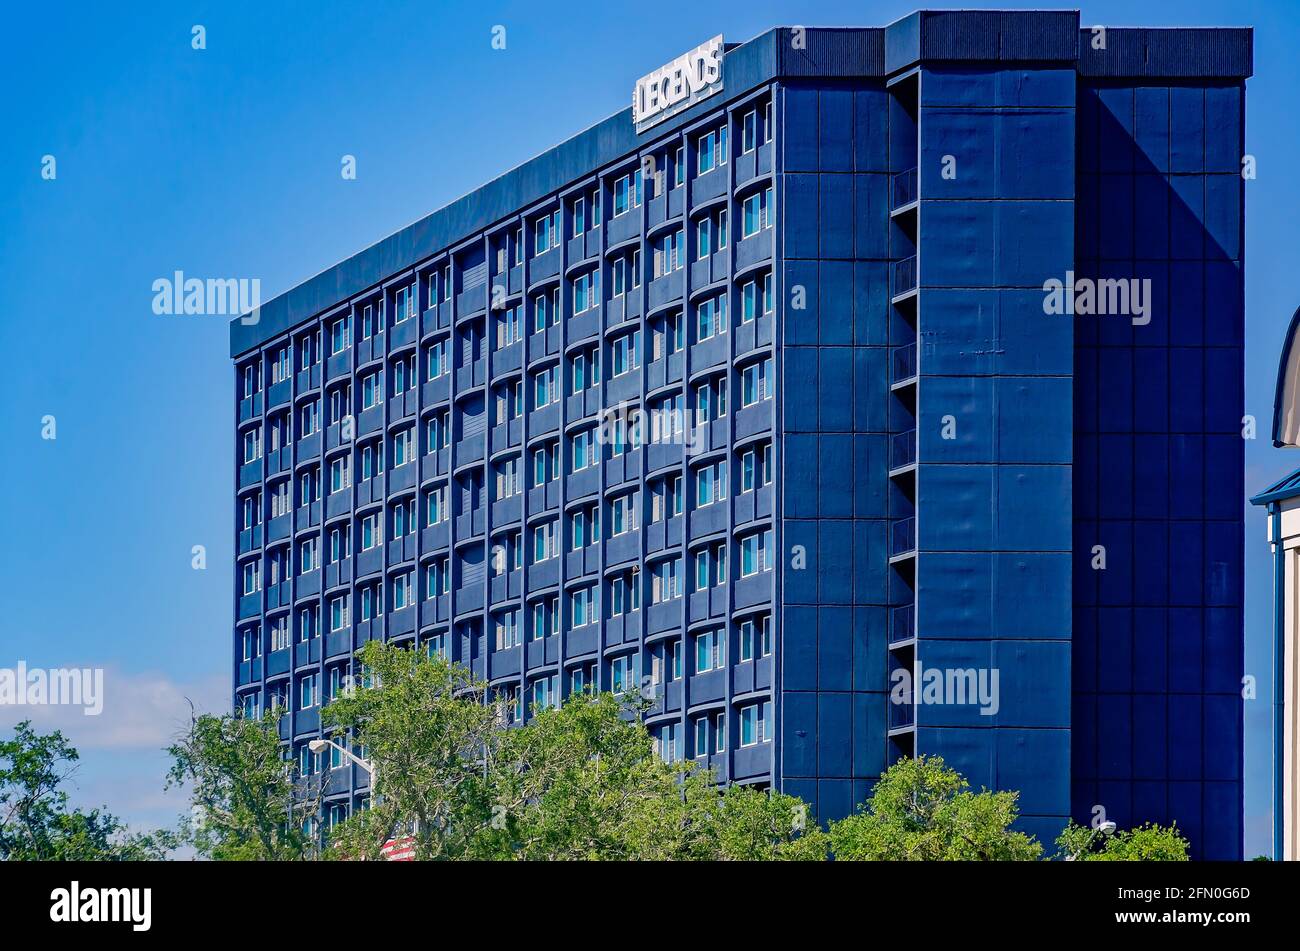 Hotel Legends is pictured, May 8, 2021, in Biloxi, Mississippi. Lodging & Leisure Investments LLC opened the 132-room, all-suites boutique hotel. Stock Photo